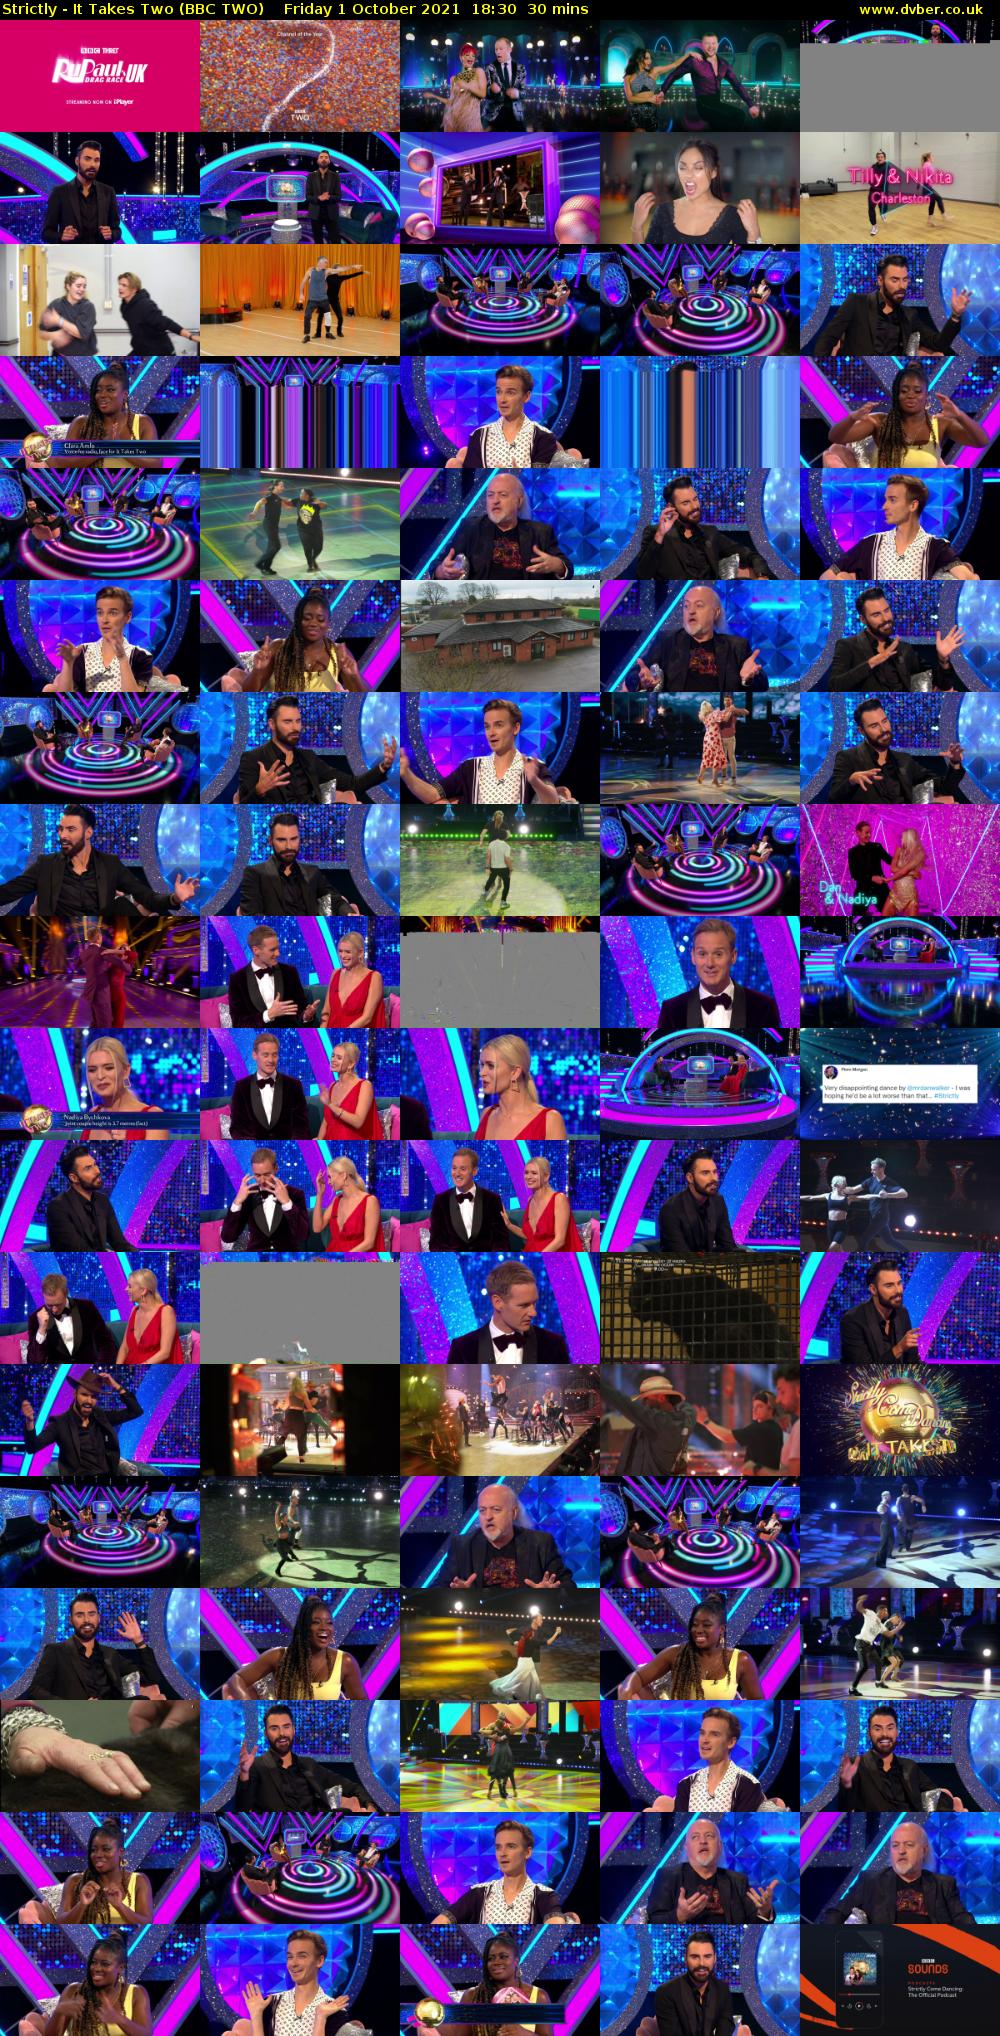 Strictly - It Takes Two (BBC TWO) Friday 1 October 2021 18:30 - 19:00